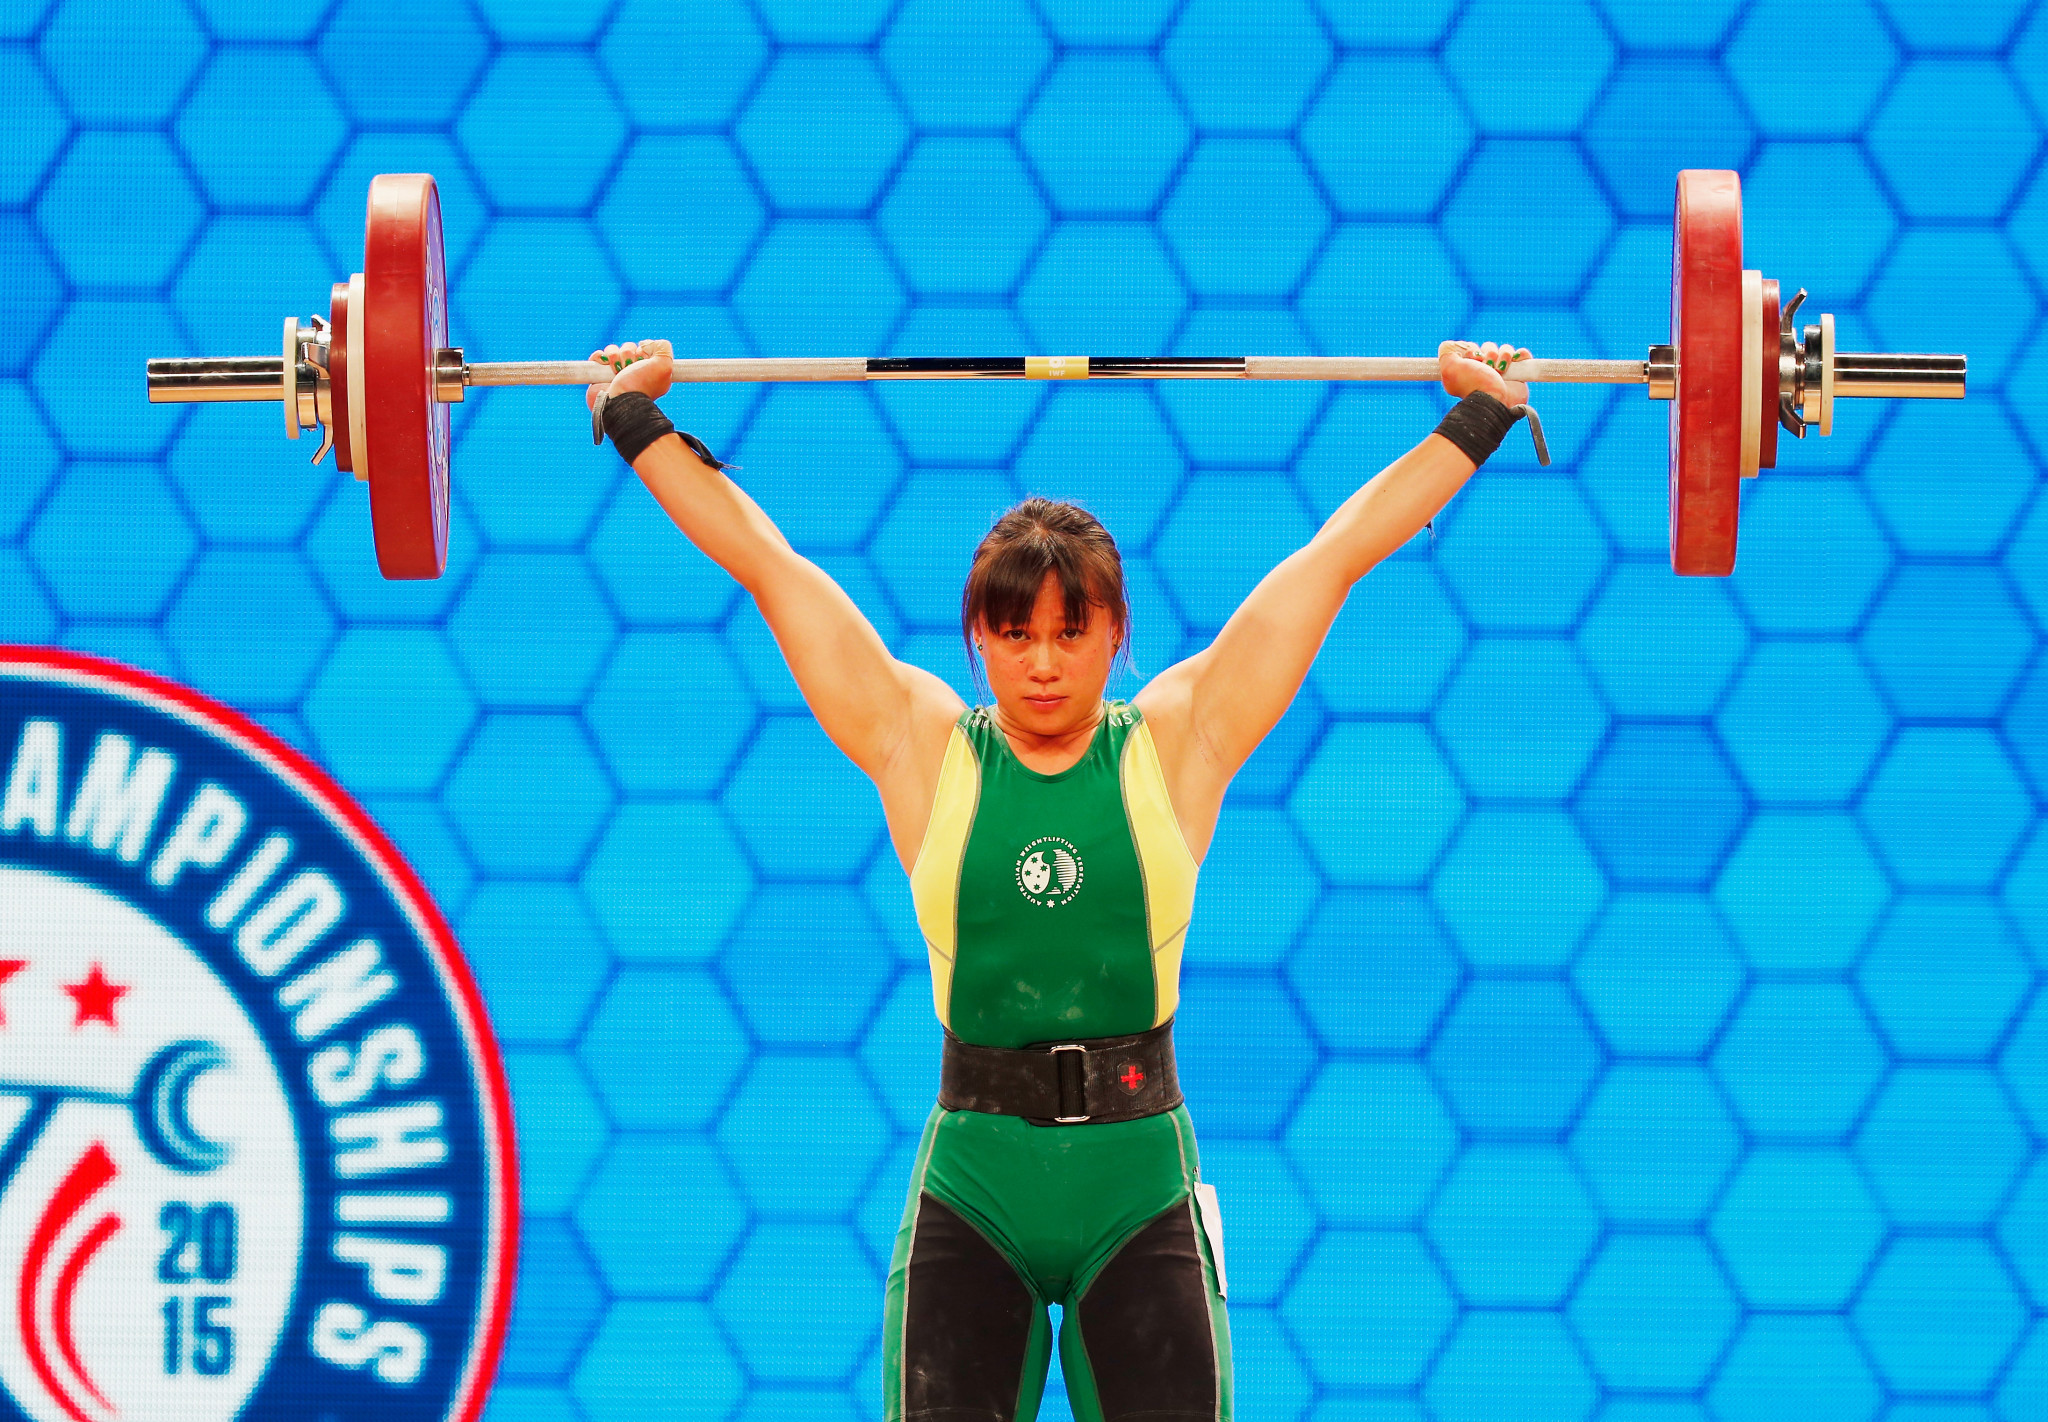 Two lifts are part of every weightlifting competition, but the goal remains to extend the bar above your head ©Getty Images